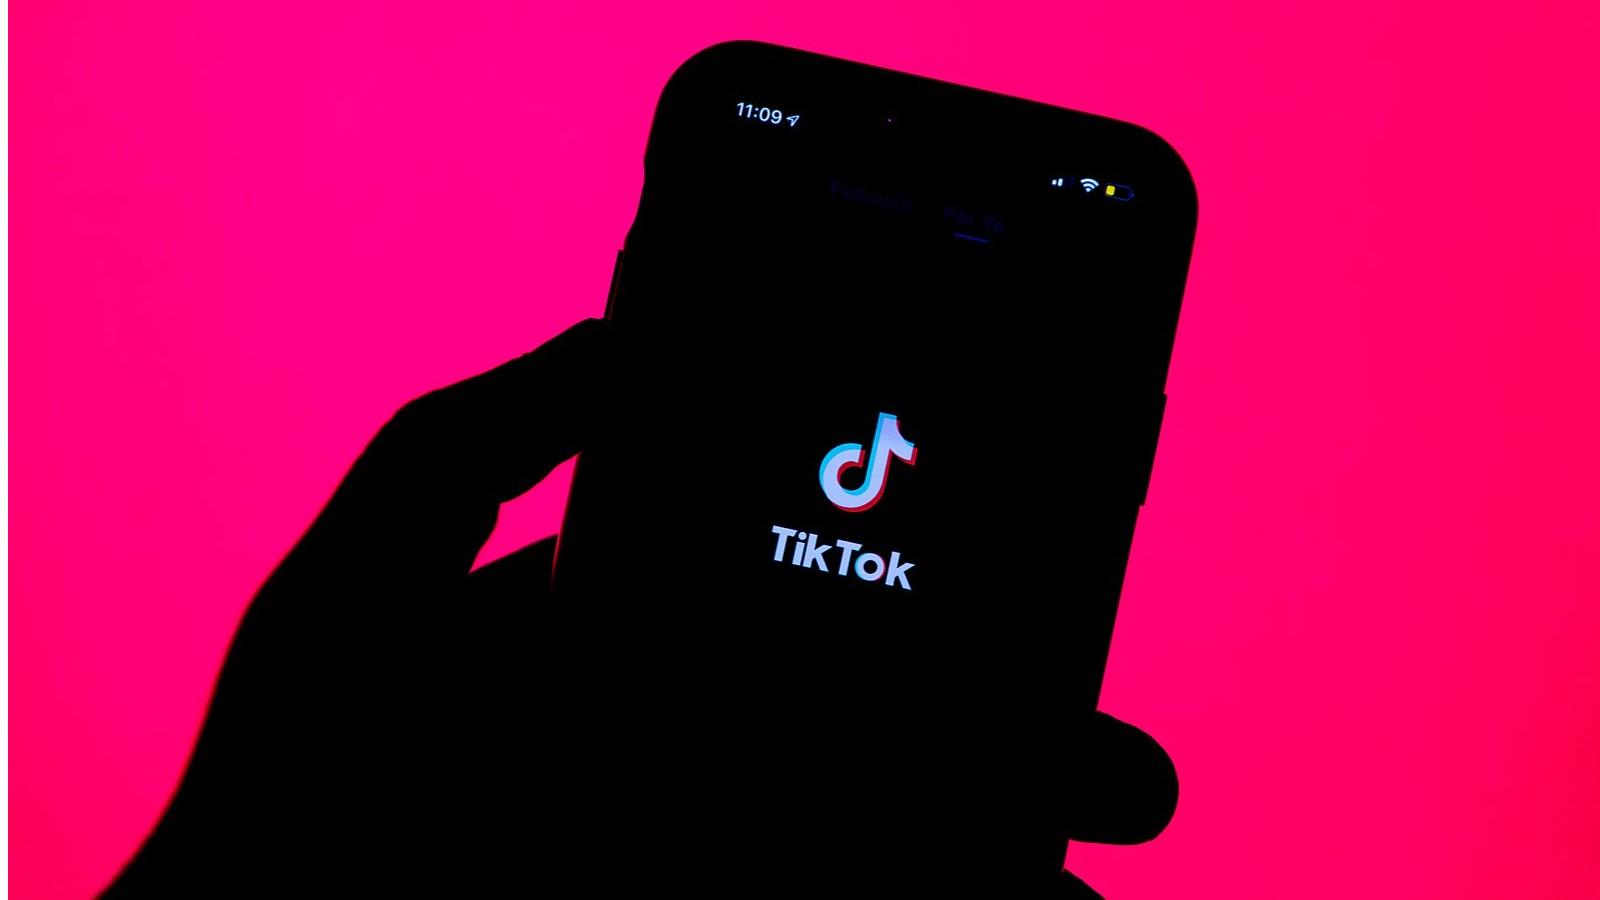 TikTok loading page on a phone with a bright background